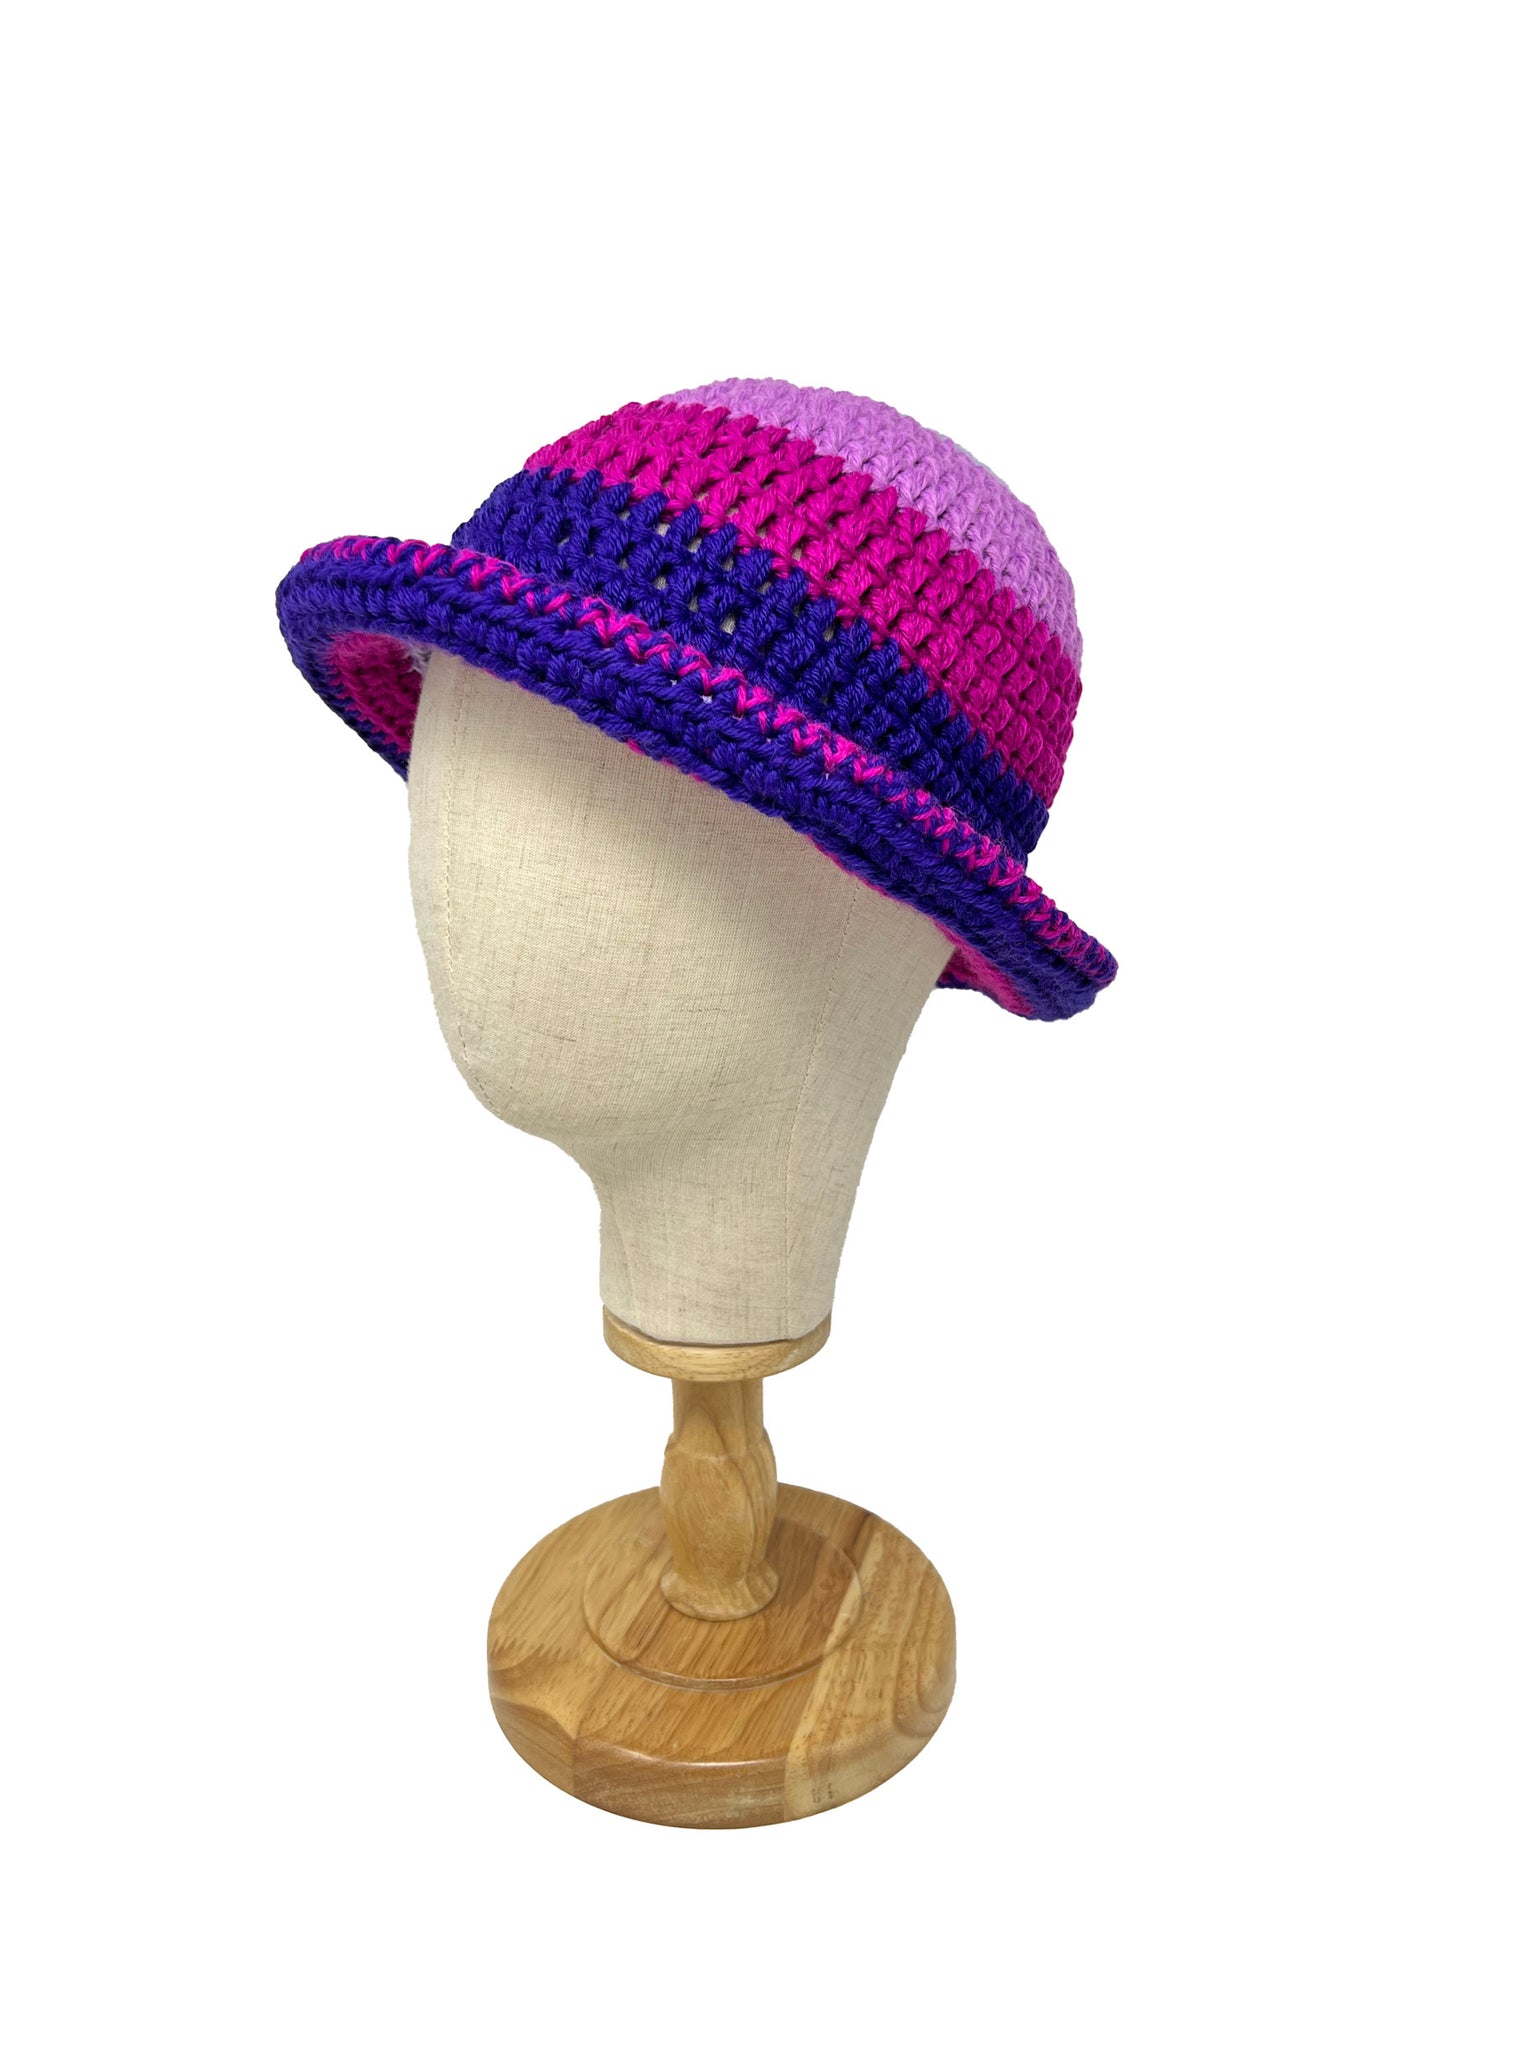 Shaded purple and fuxia striped hat in ethnic pattern crochet wool